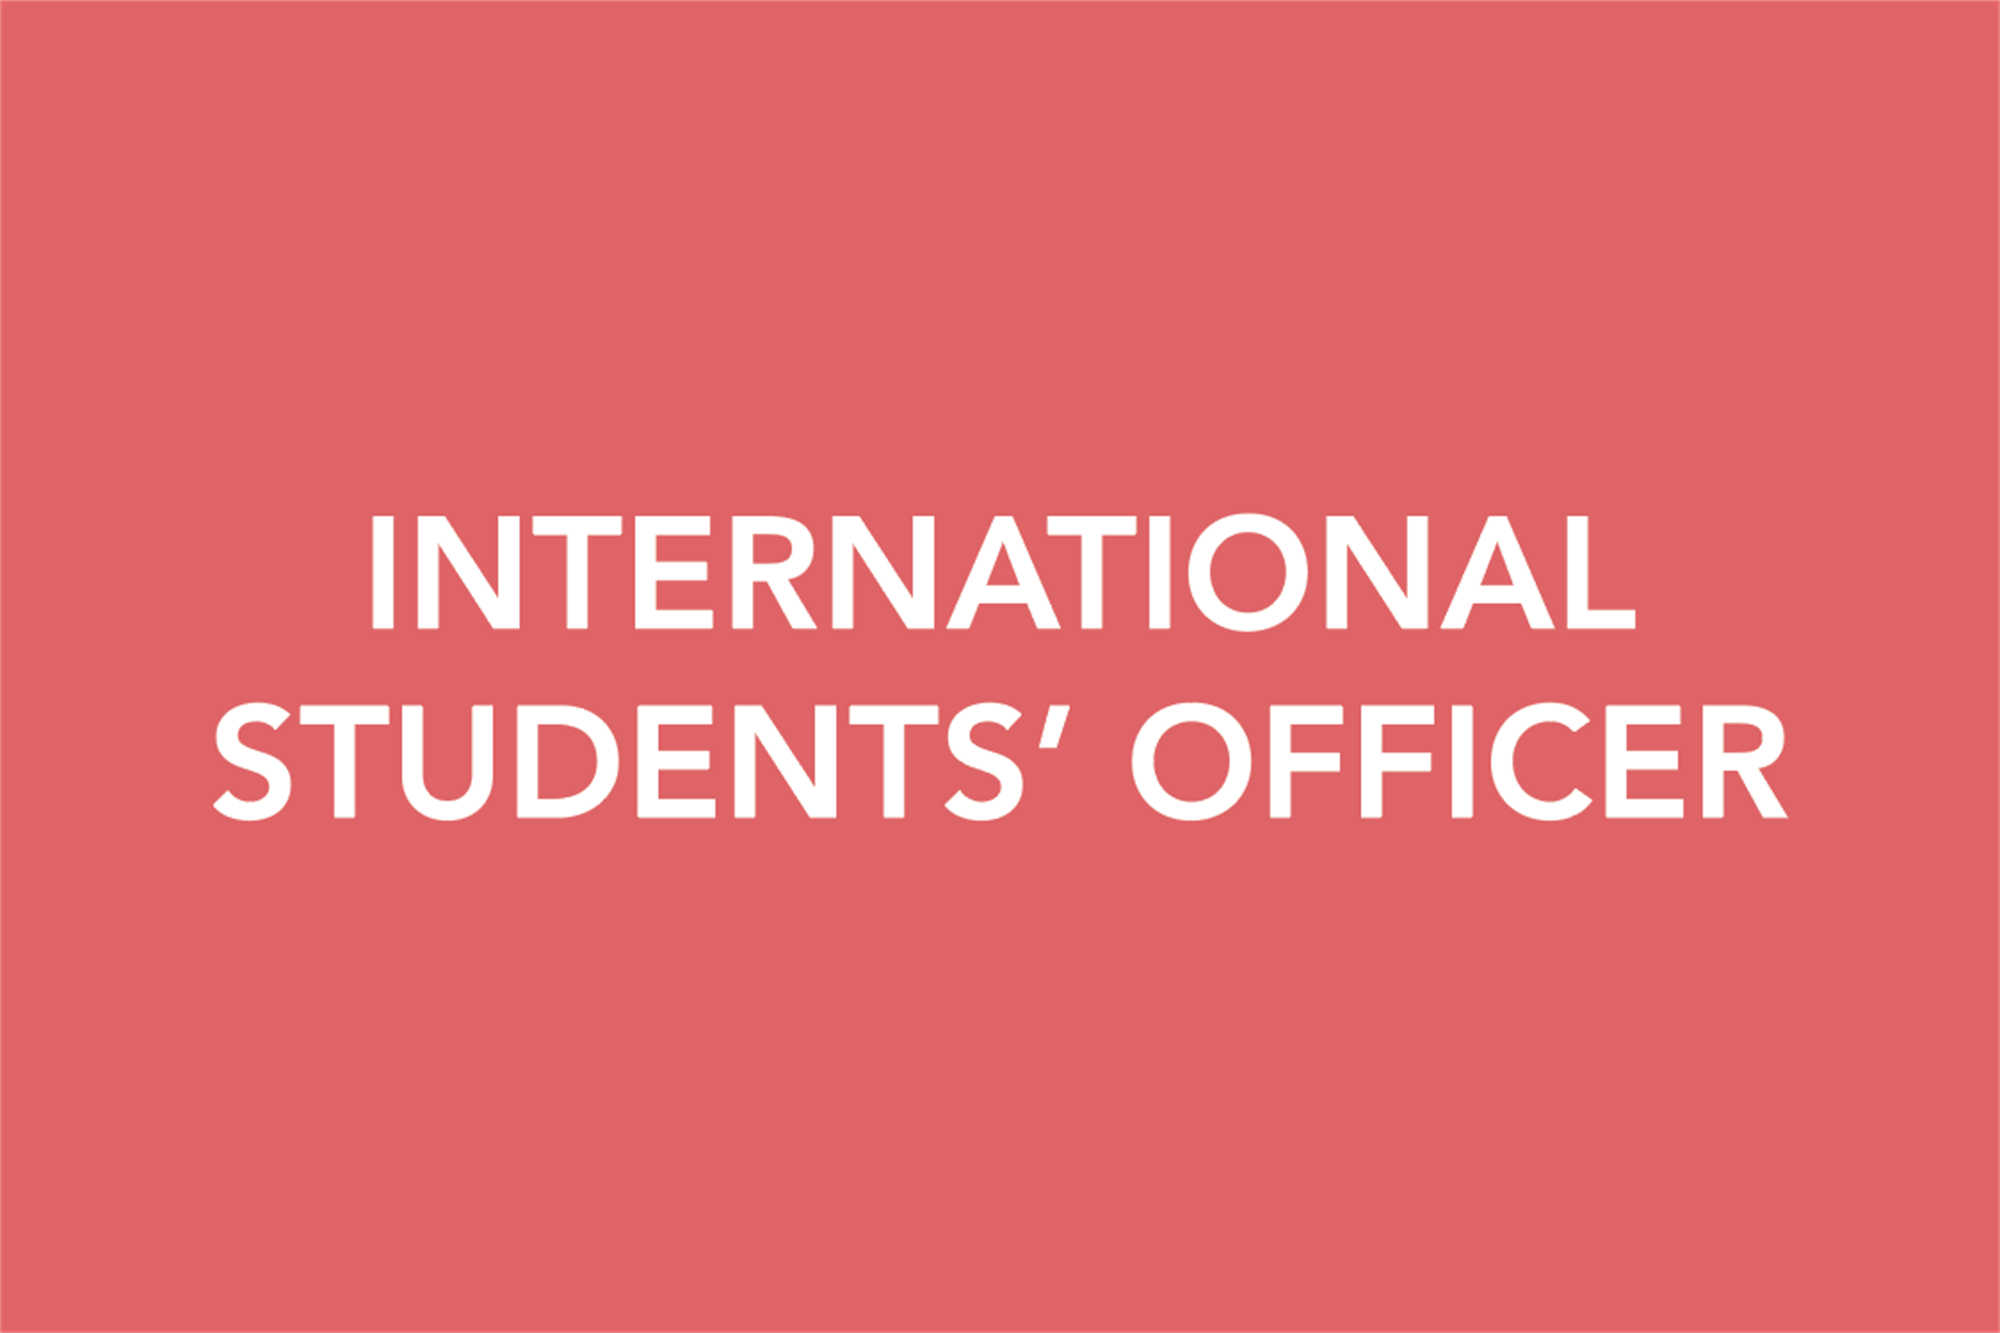 This officer represents the views and interests of international students on Student Council and to the University.